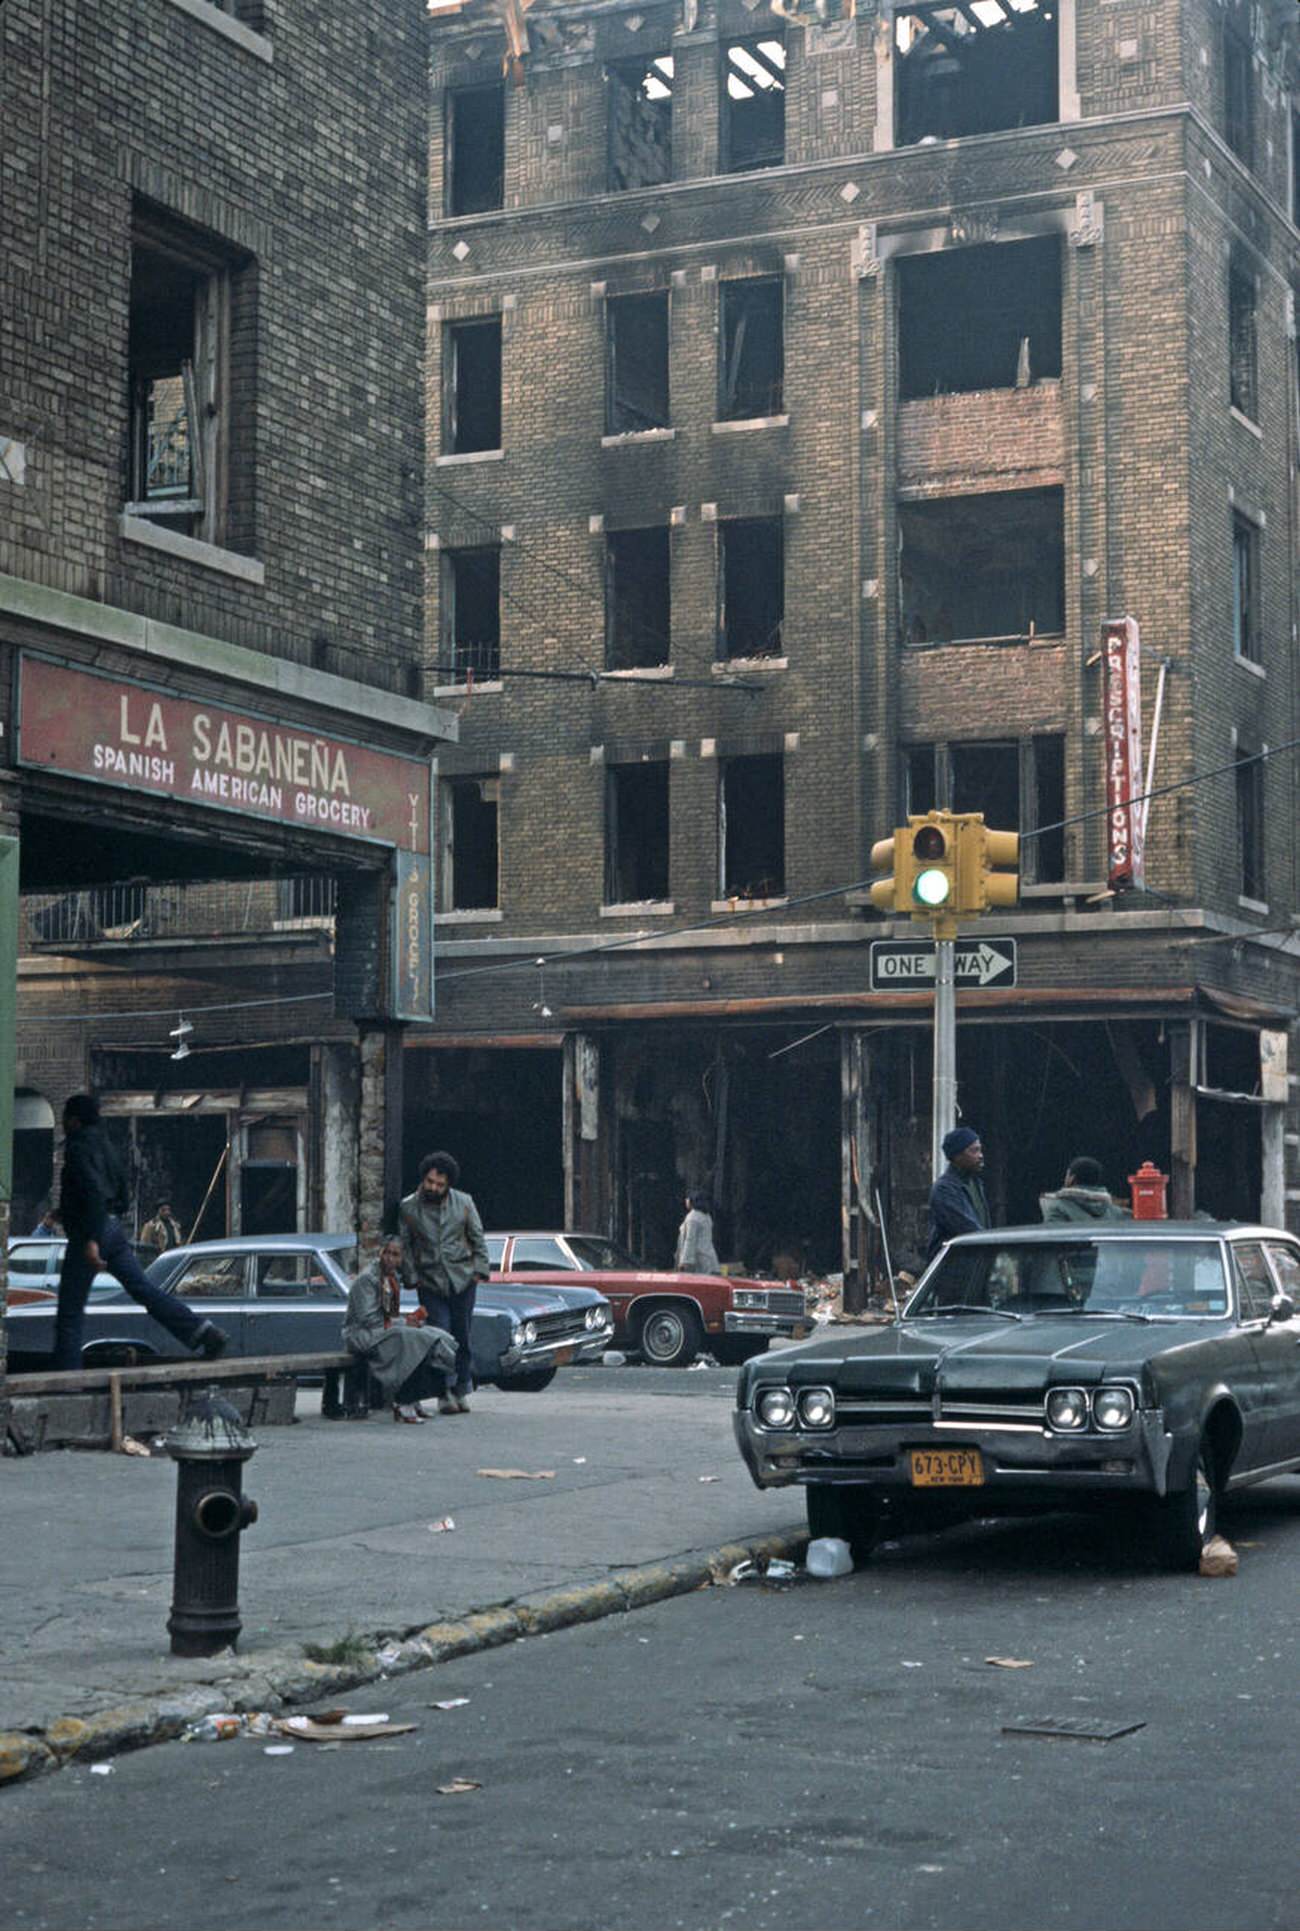 Burnt-Out Tenement Blocks And Shops In The South Bronx, August 1977